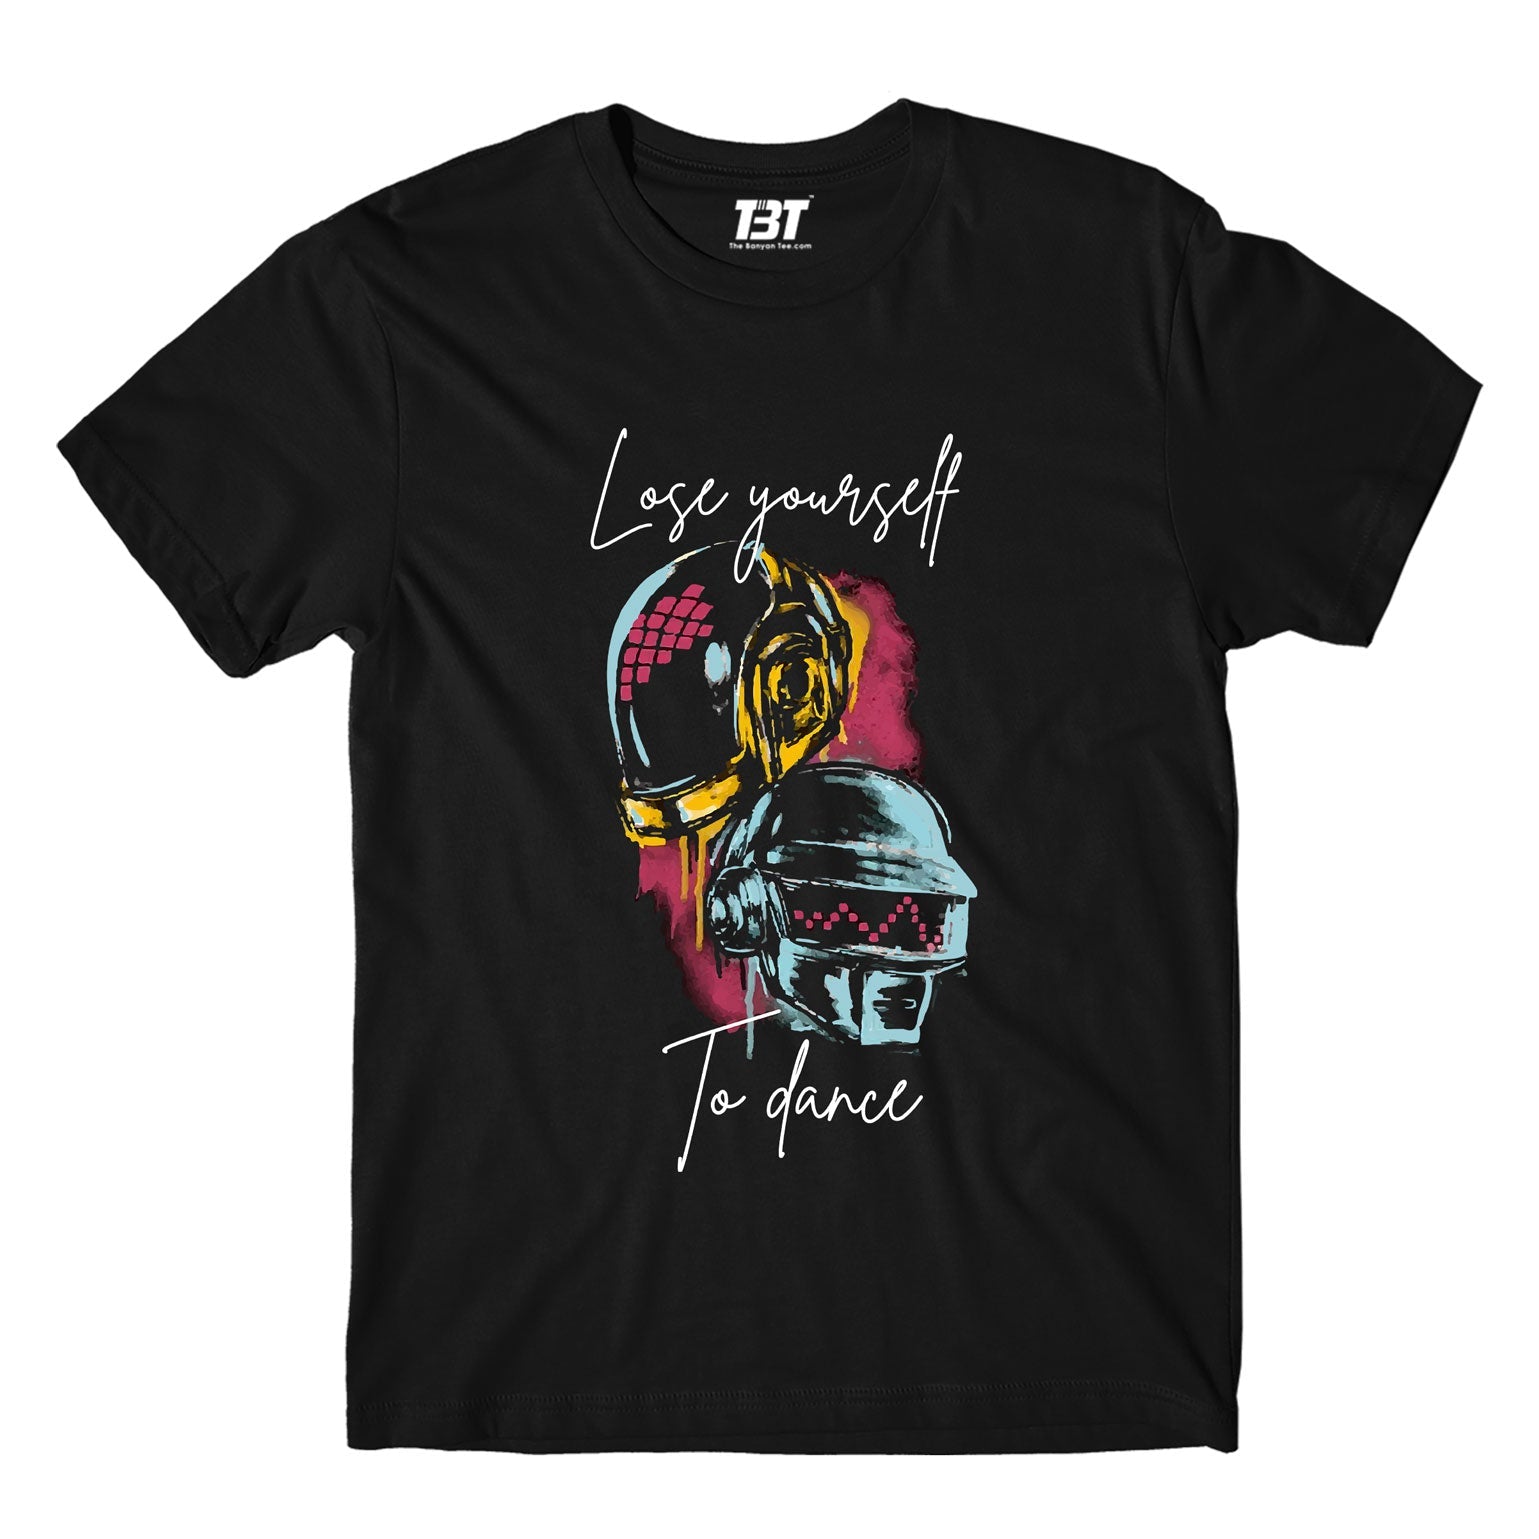 the banyan tee merch on sale Daft Punk T shirt - On Sale - 3XL (Chest size 48 IN)